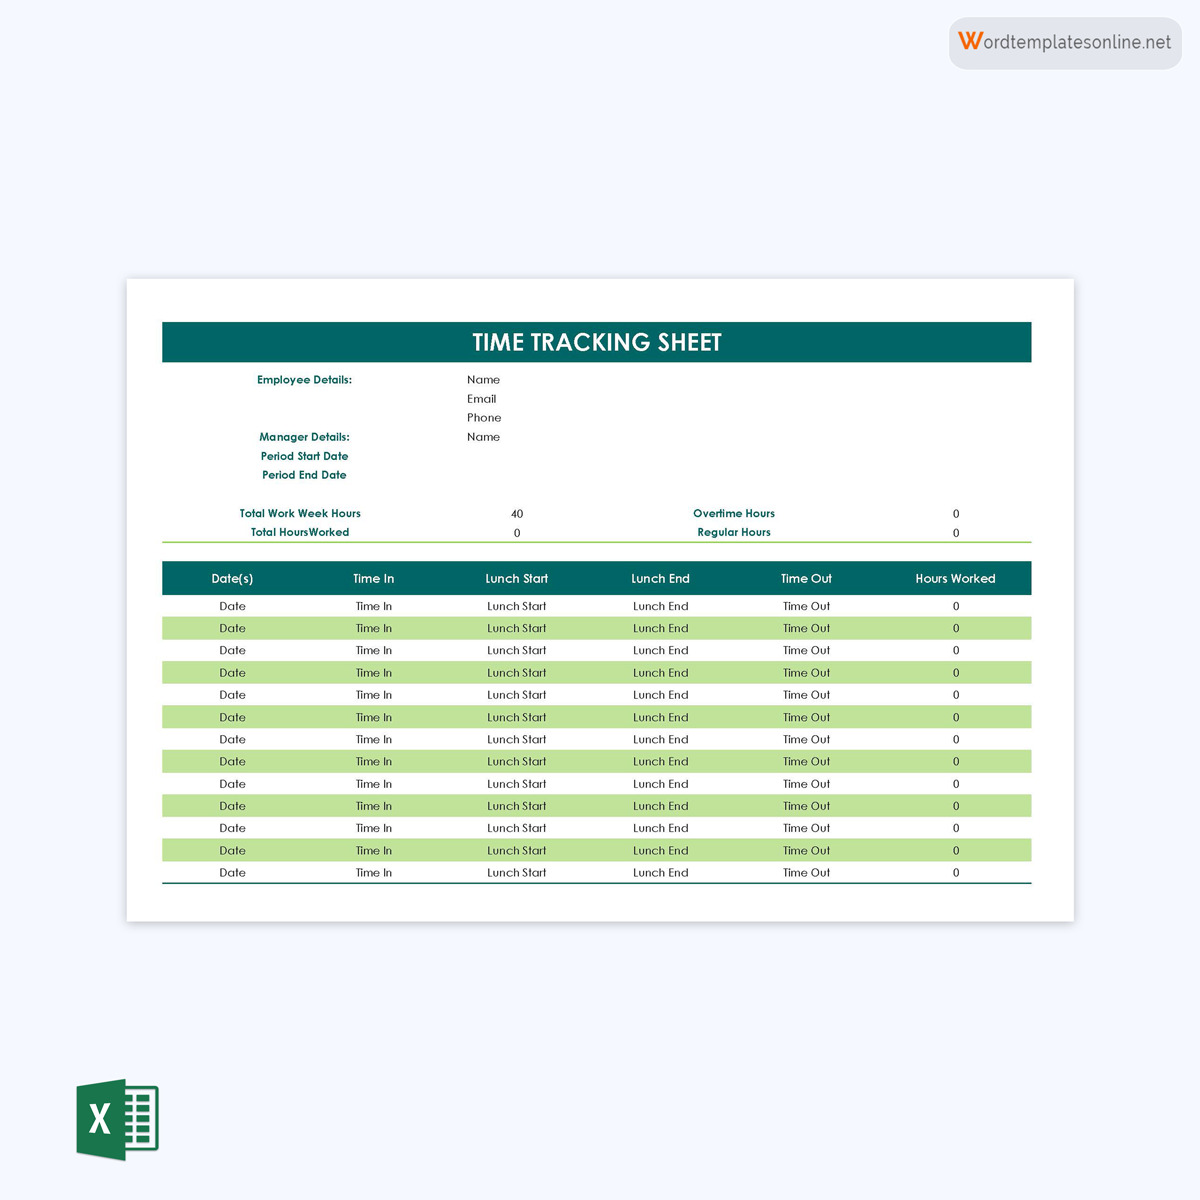 Free Customizable Time Tracking Spreadsheet Template 07 as Excel Sheet